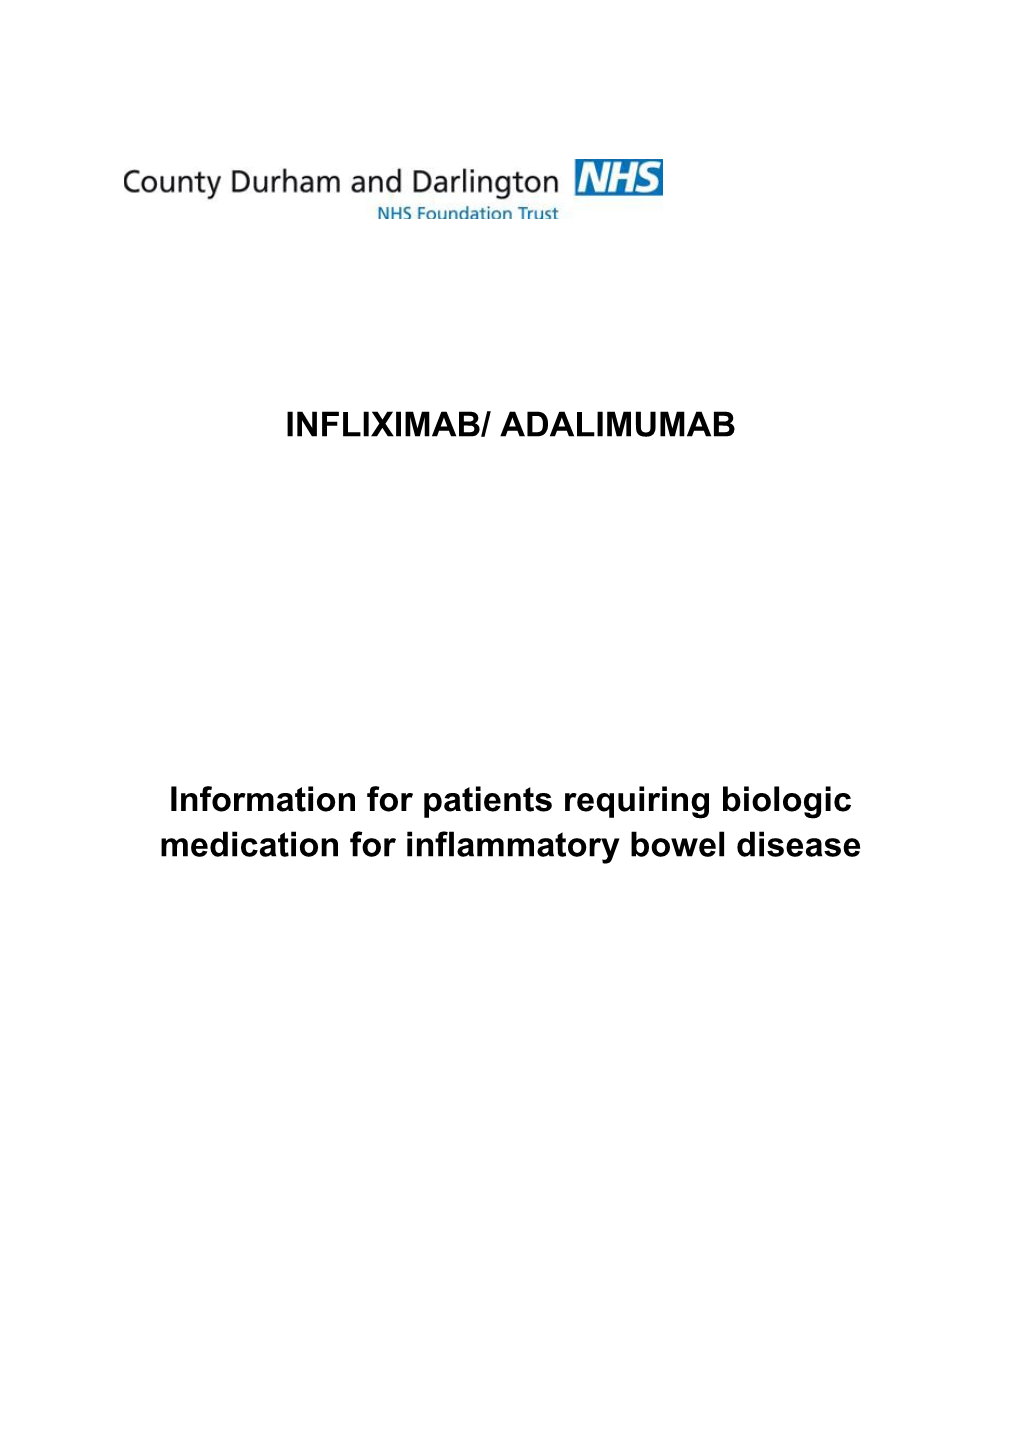 Information for Patients Requiring Biologicmedication for Inflammatory Bowel Disease